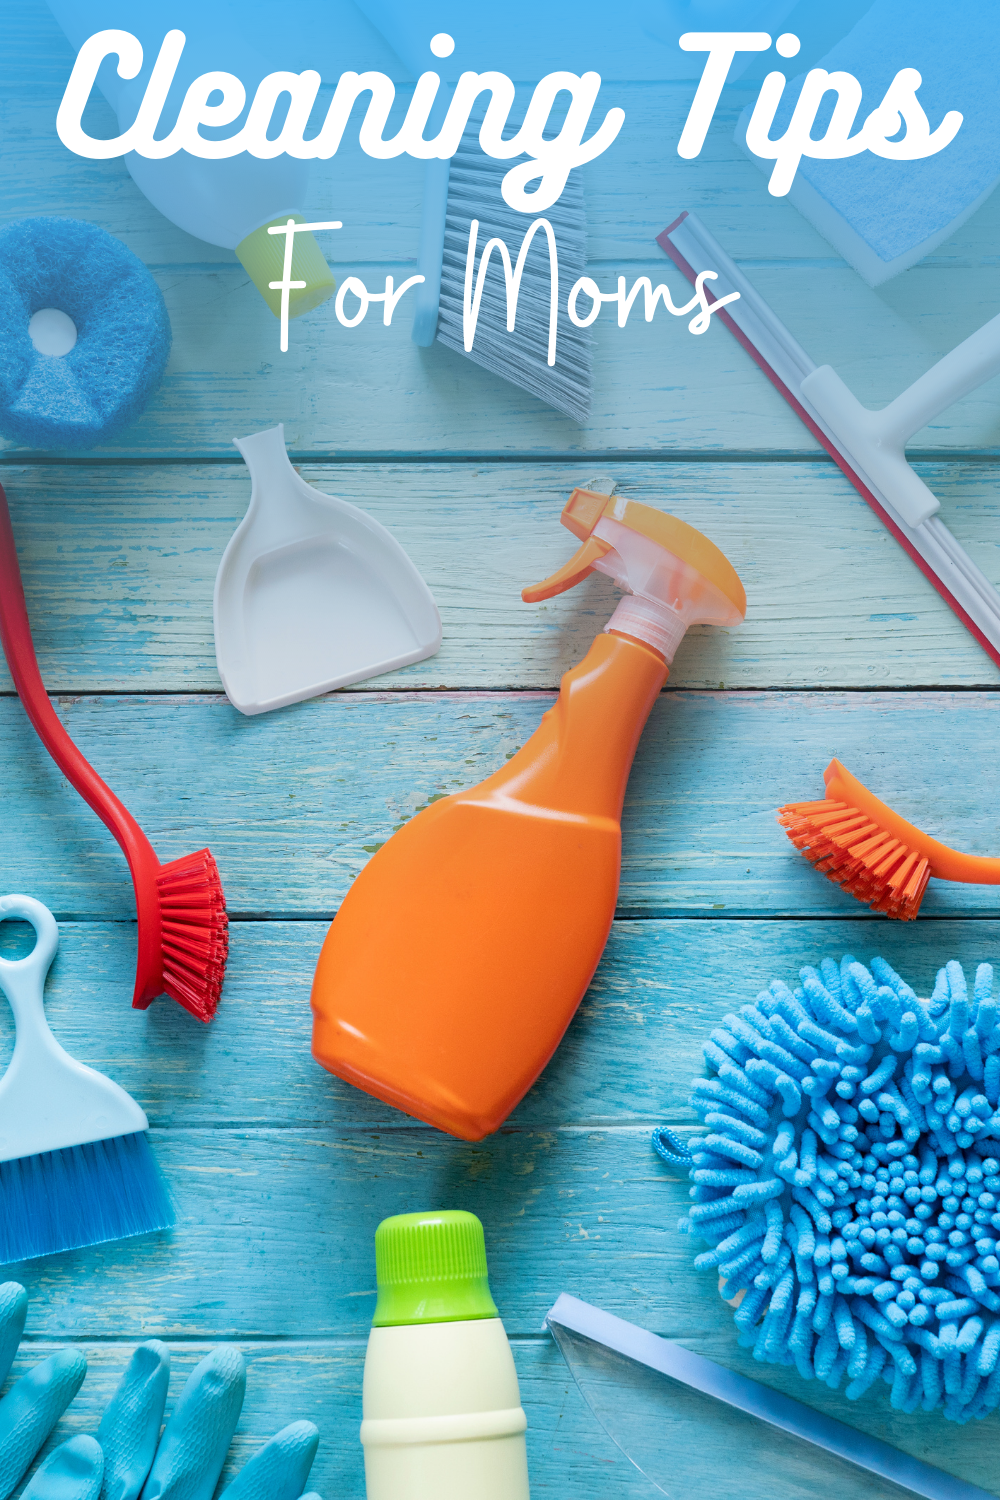 https://sandeebooth.com/wp-content/uploads/2021/06/Cleaning-tips-for-moms.png